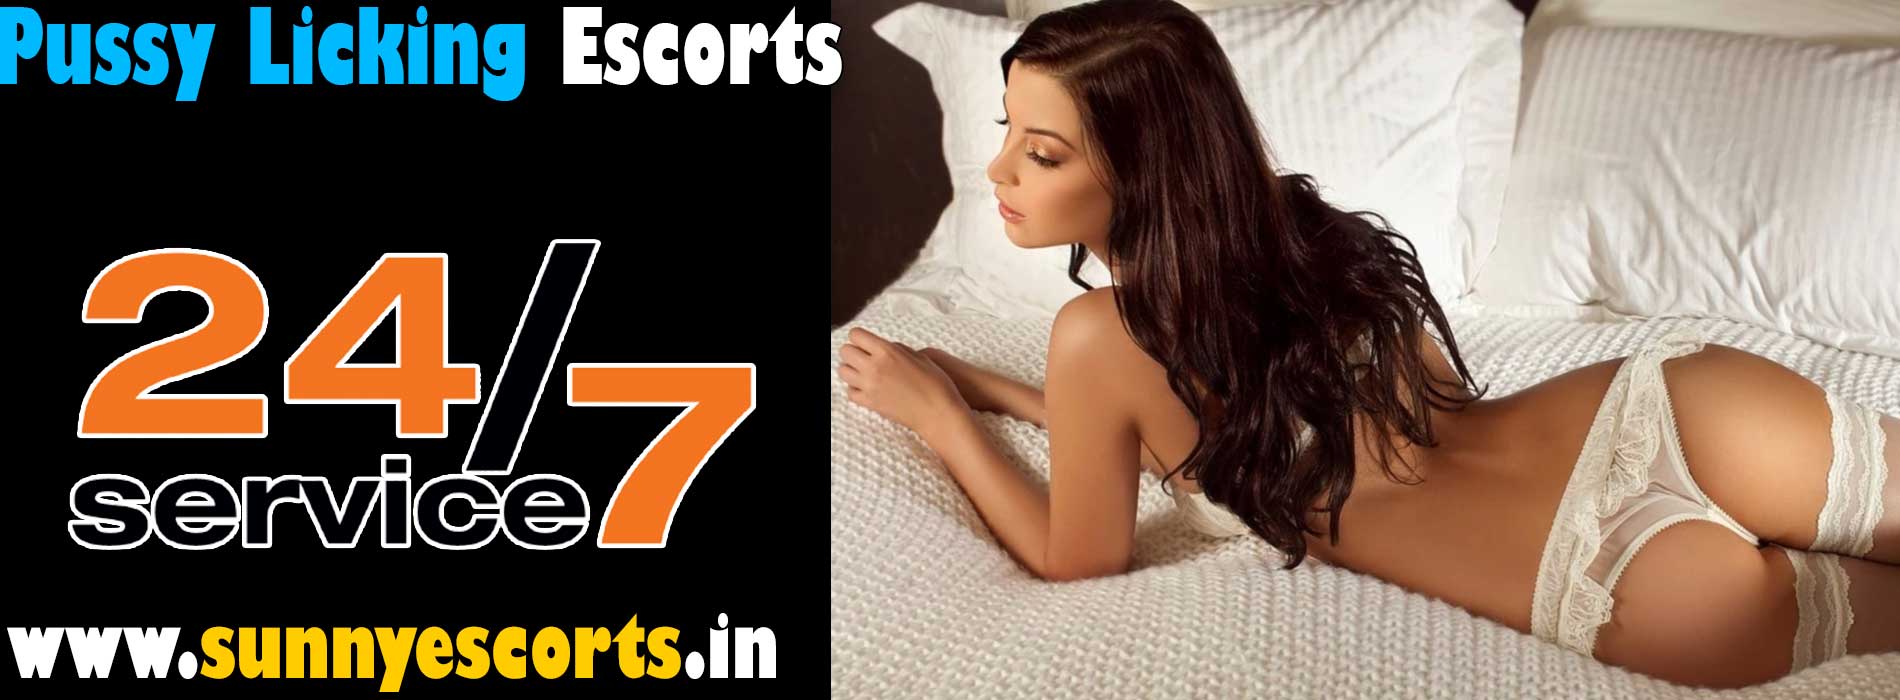 Pussy Licking Escorts in Bangalore